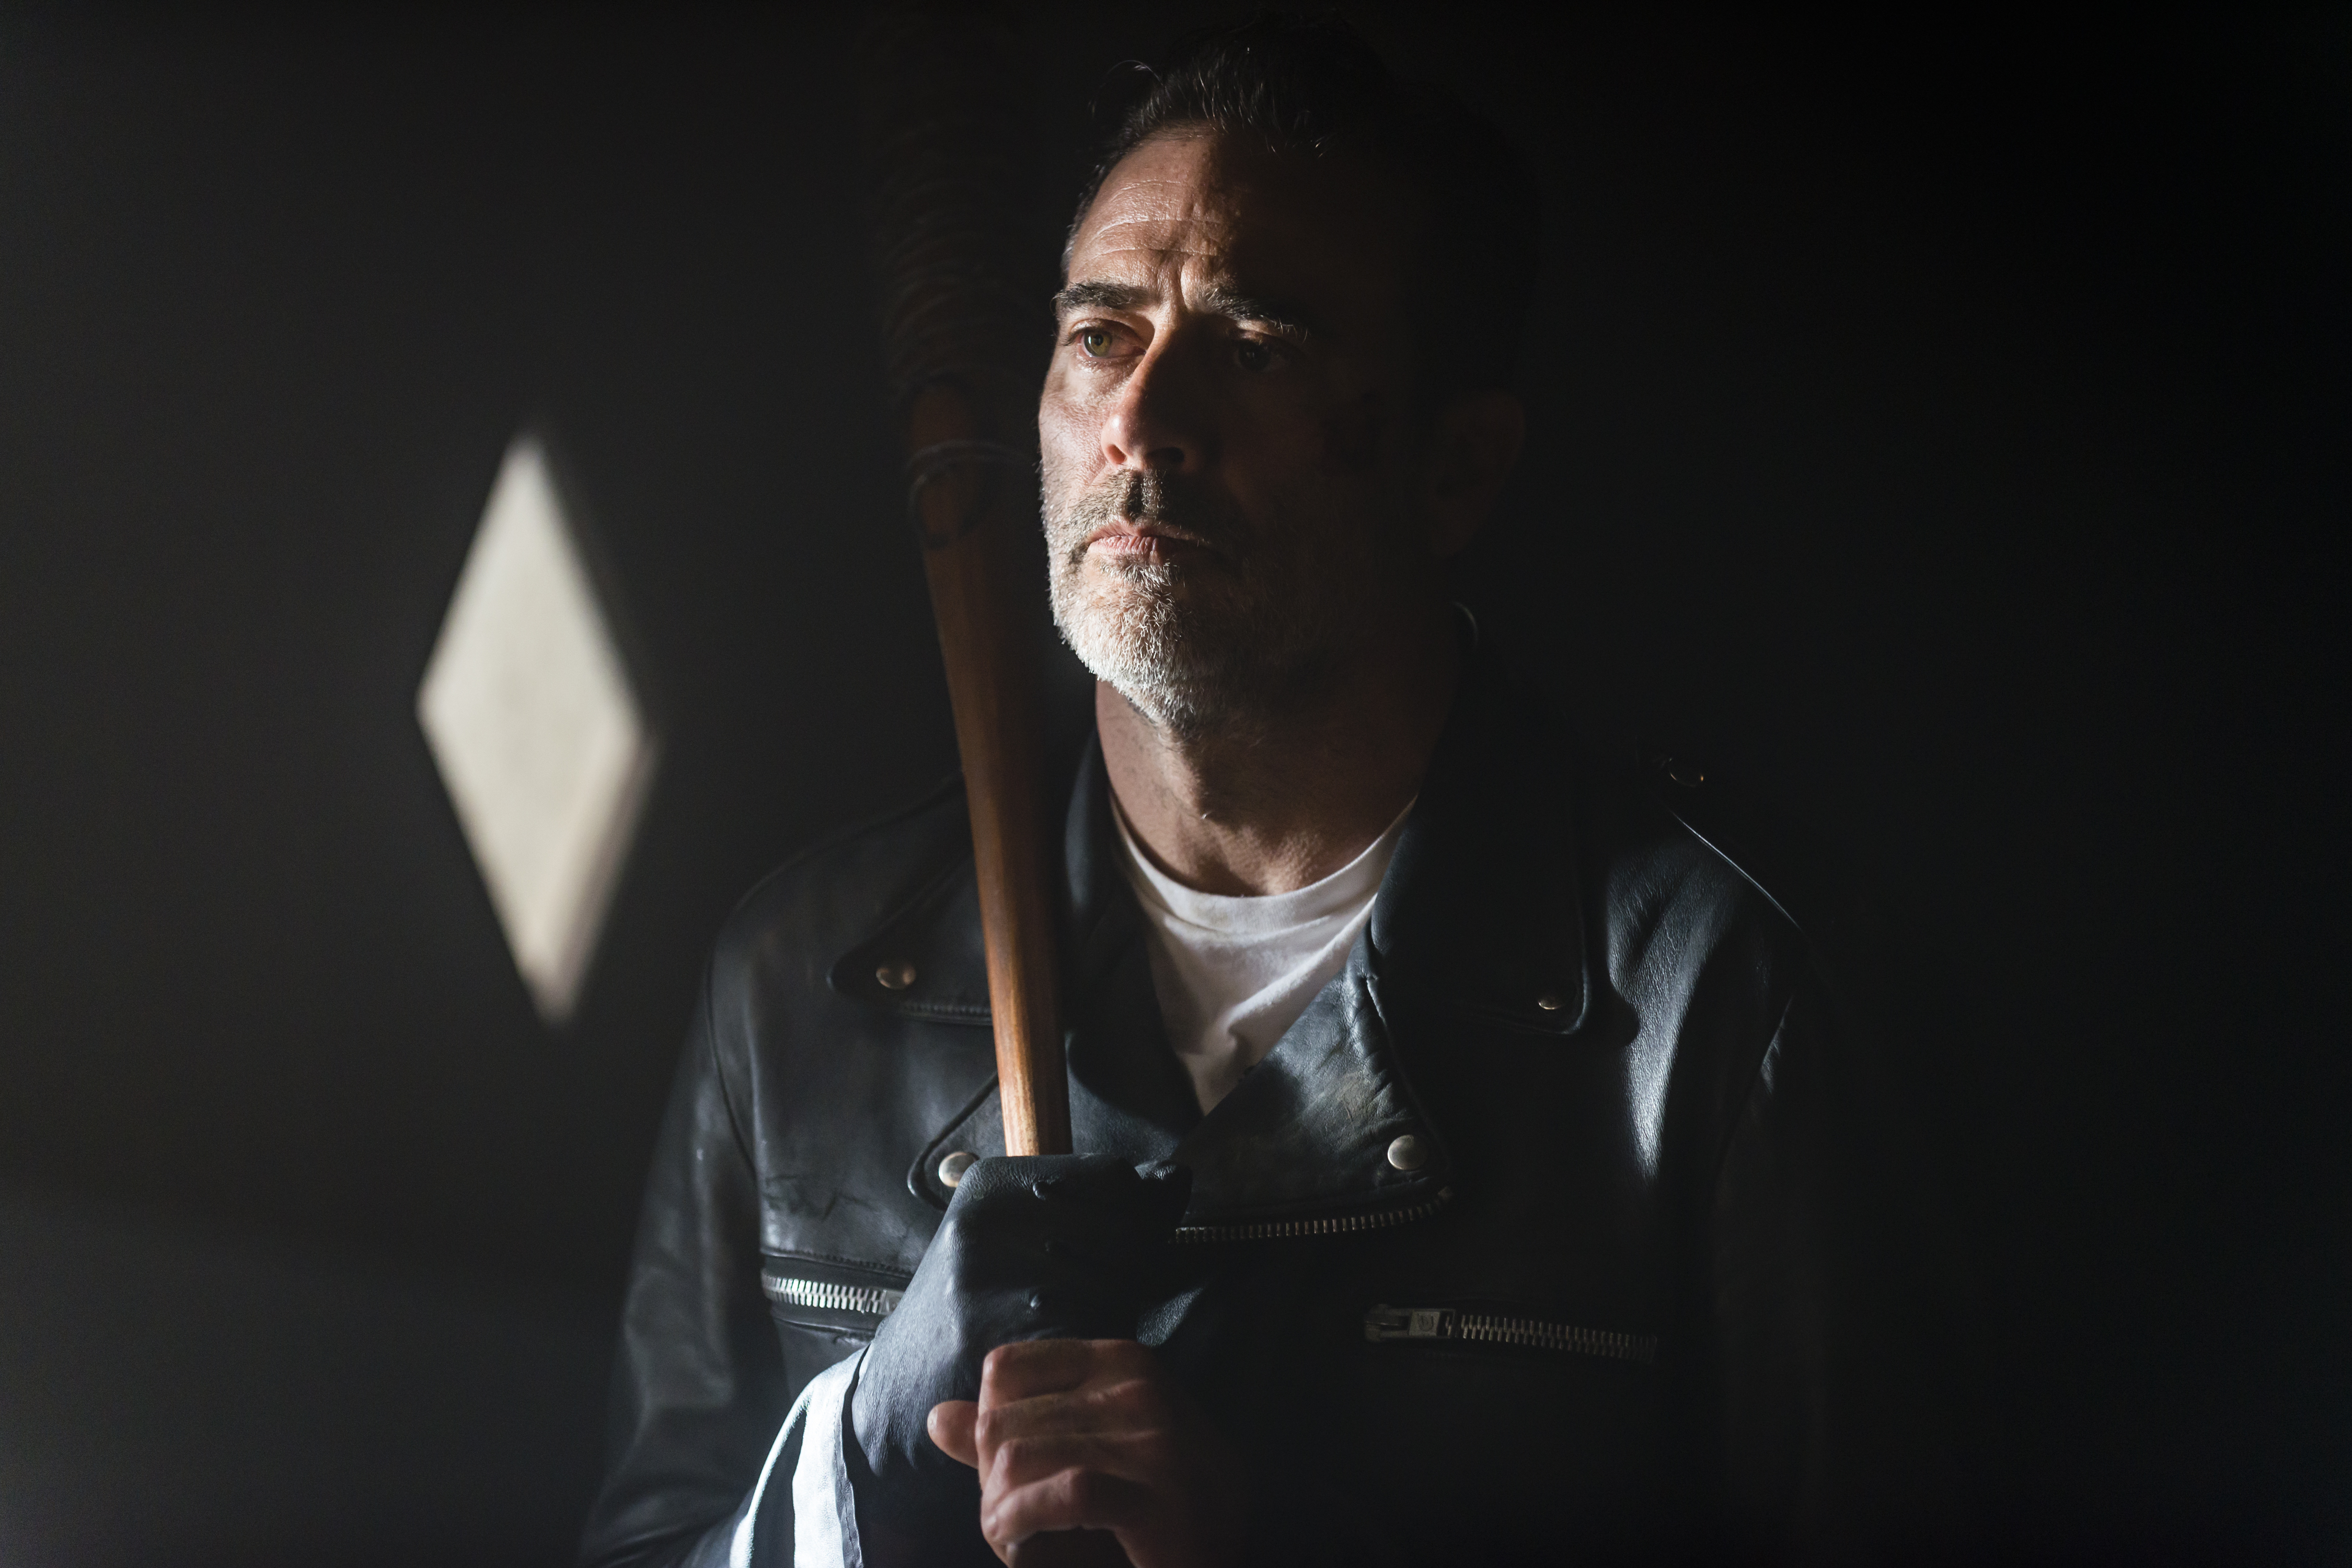 the walking dead negan wallpaper,darkness,performance,microphone,photography,hand